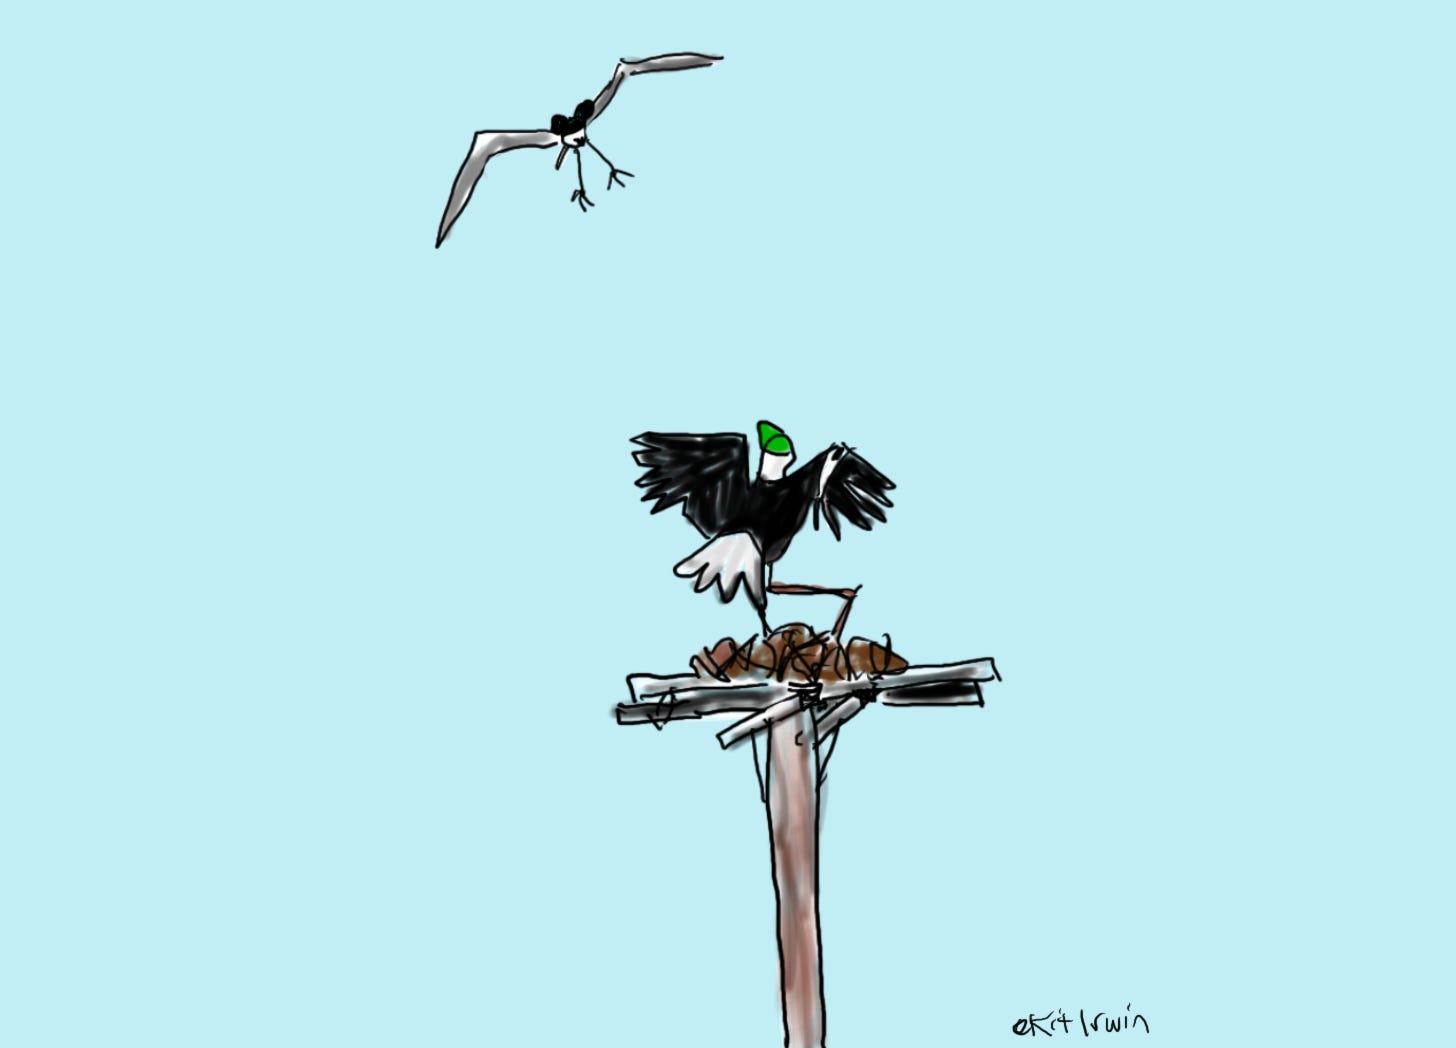 Osprey, wearing a Mouse ears hat, swoops down with talons extended. An eagle, wearing a green ball cap, balances on perch with wings extended, looking up at osprey. The perch is part of a large nest on top of a pole.